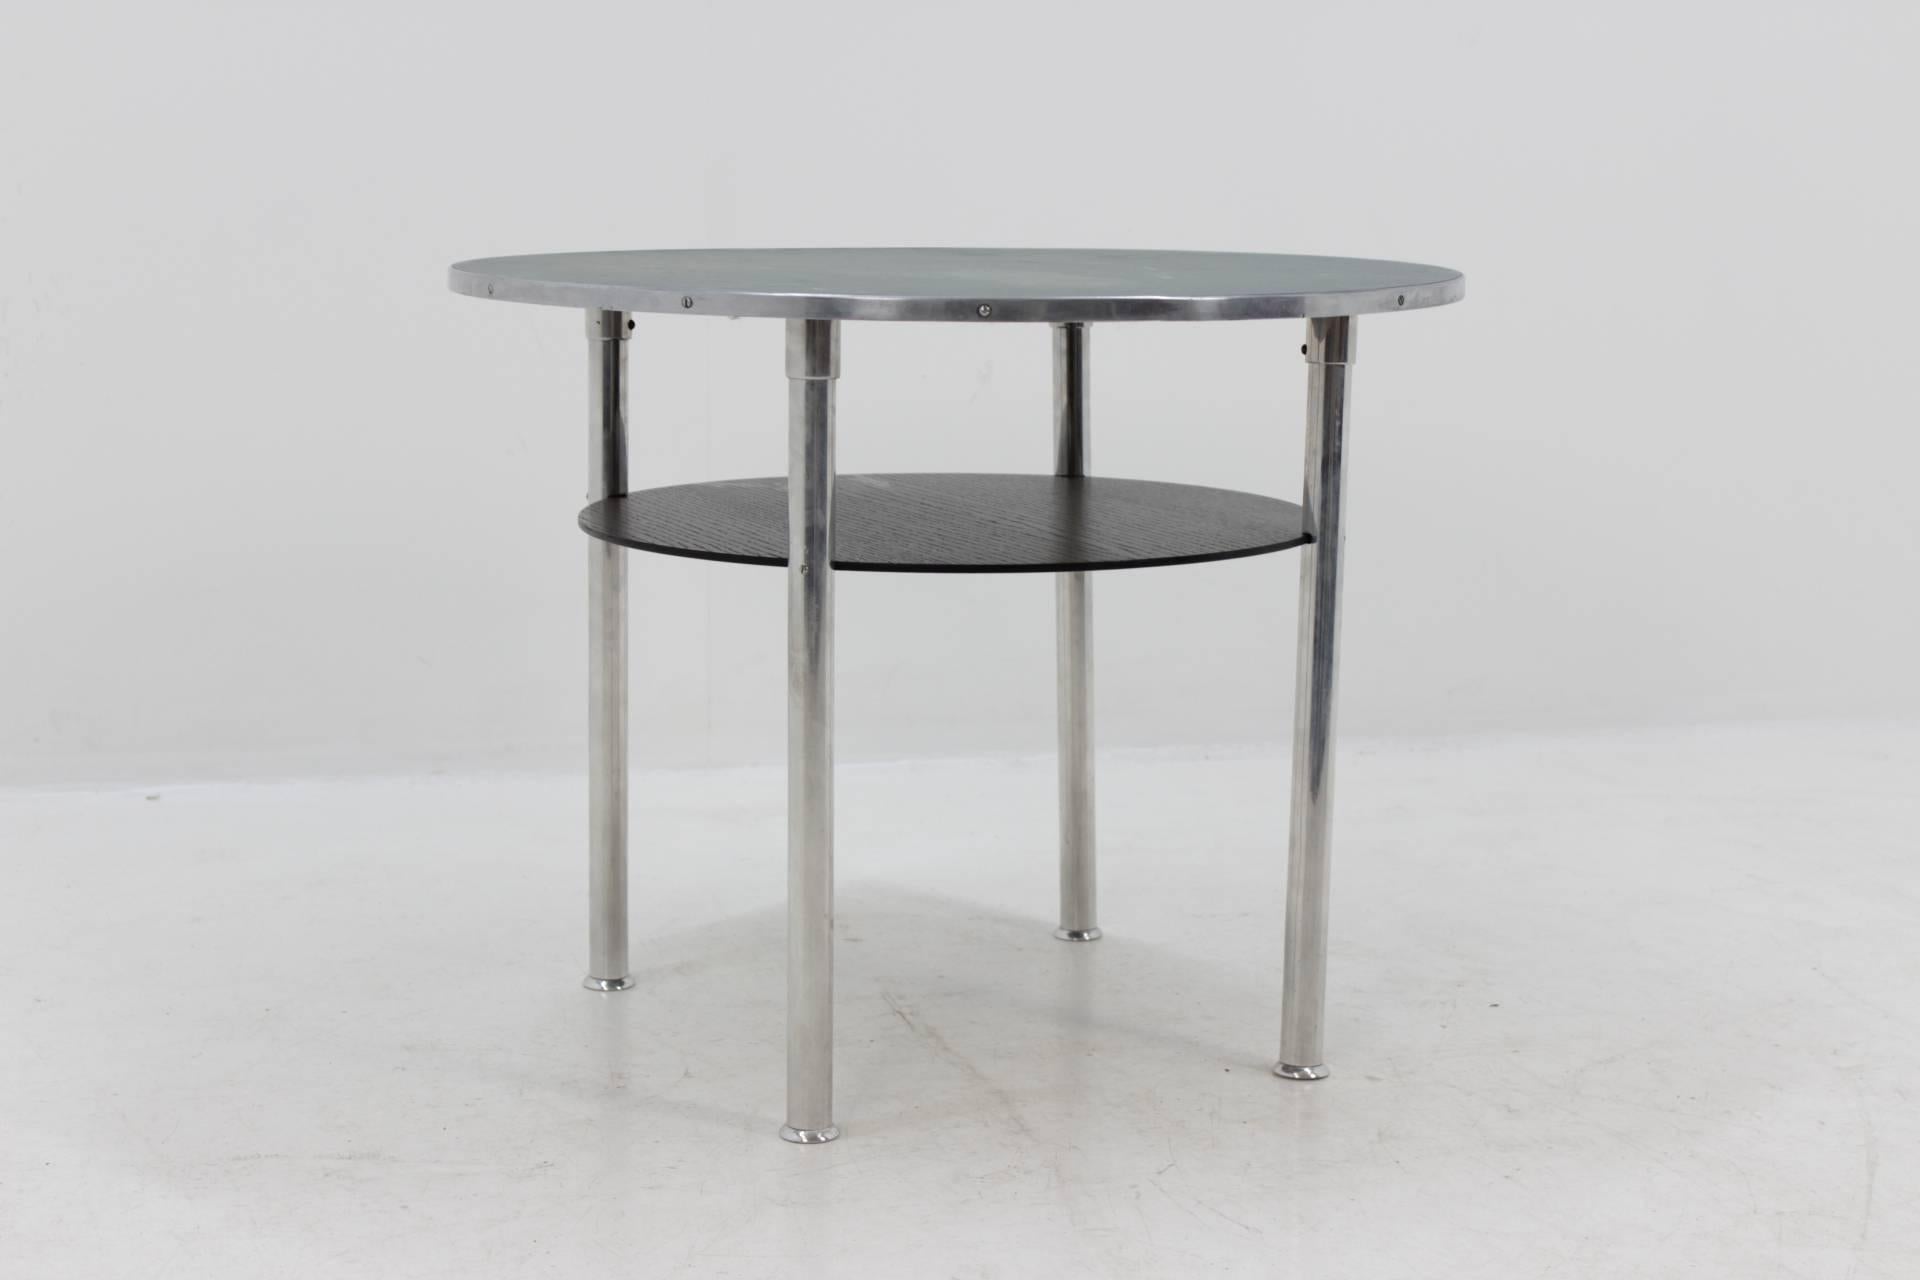 - Czechoslovakia
- 1930s
- Unique model
- Comes from flat of one of the most famous actress that time 
- Polished light aluminium legs 
- Rare linoleum desk.